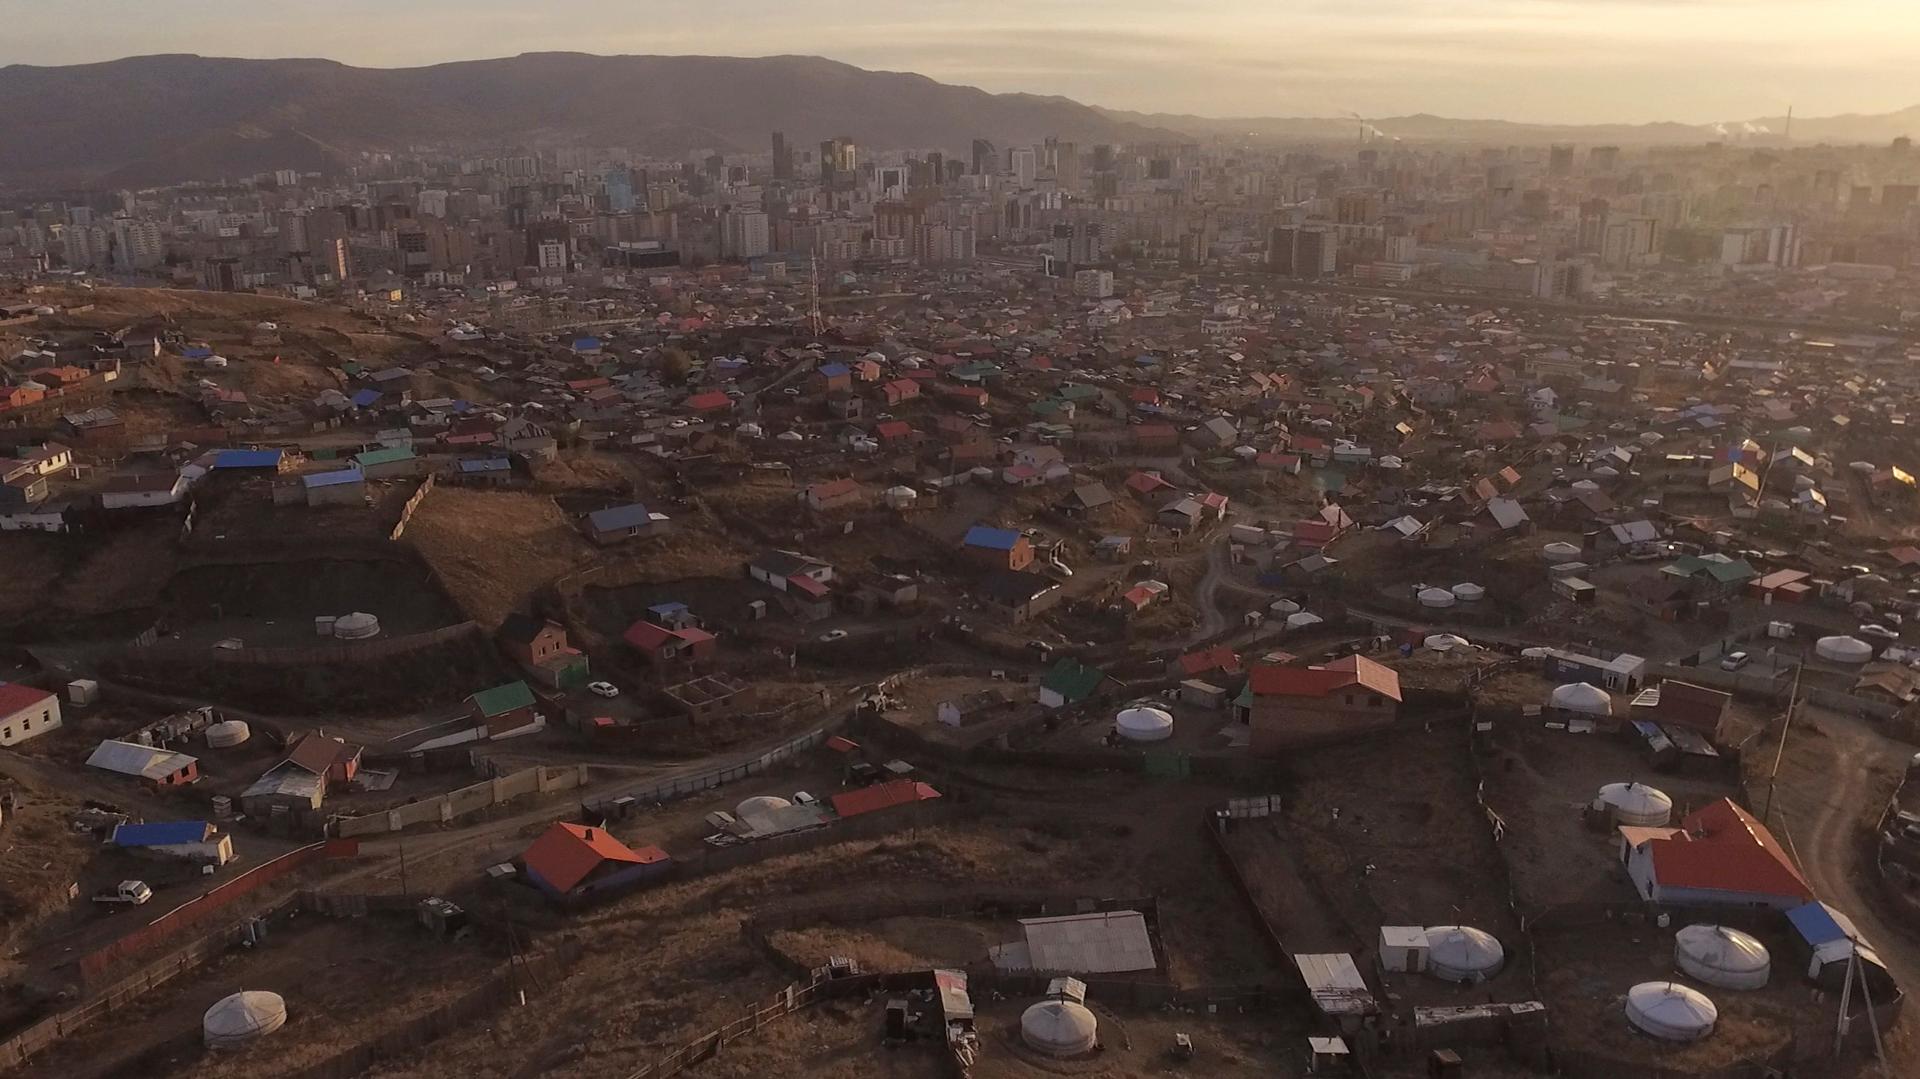 A growing patchwork of dirt roads, fences and circular tent homes called “gers,” or yurts, is spreading on the outskirts of Ulaanbaatar. Recently more than 200,000 households of former nomads have settled here.